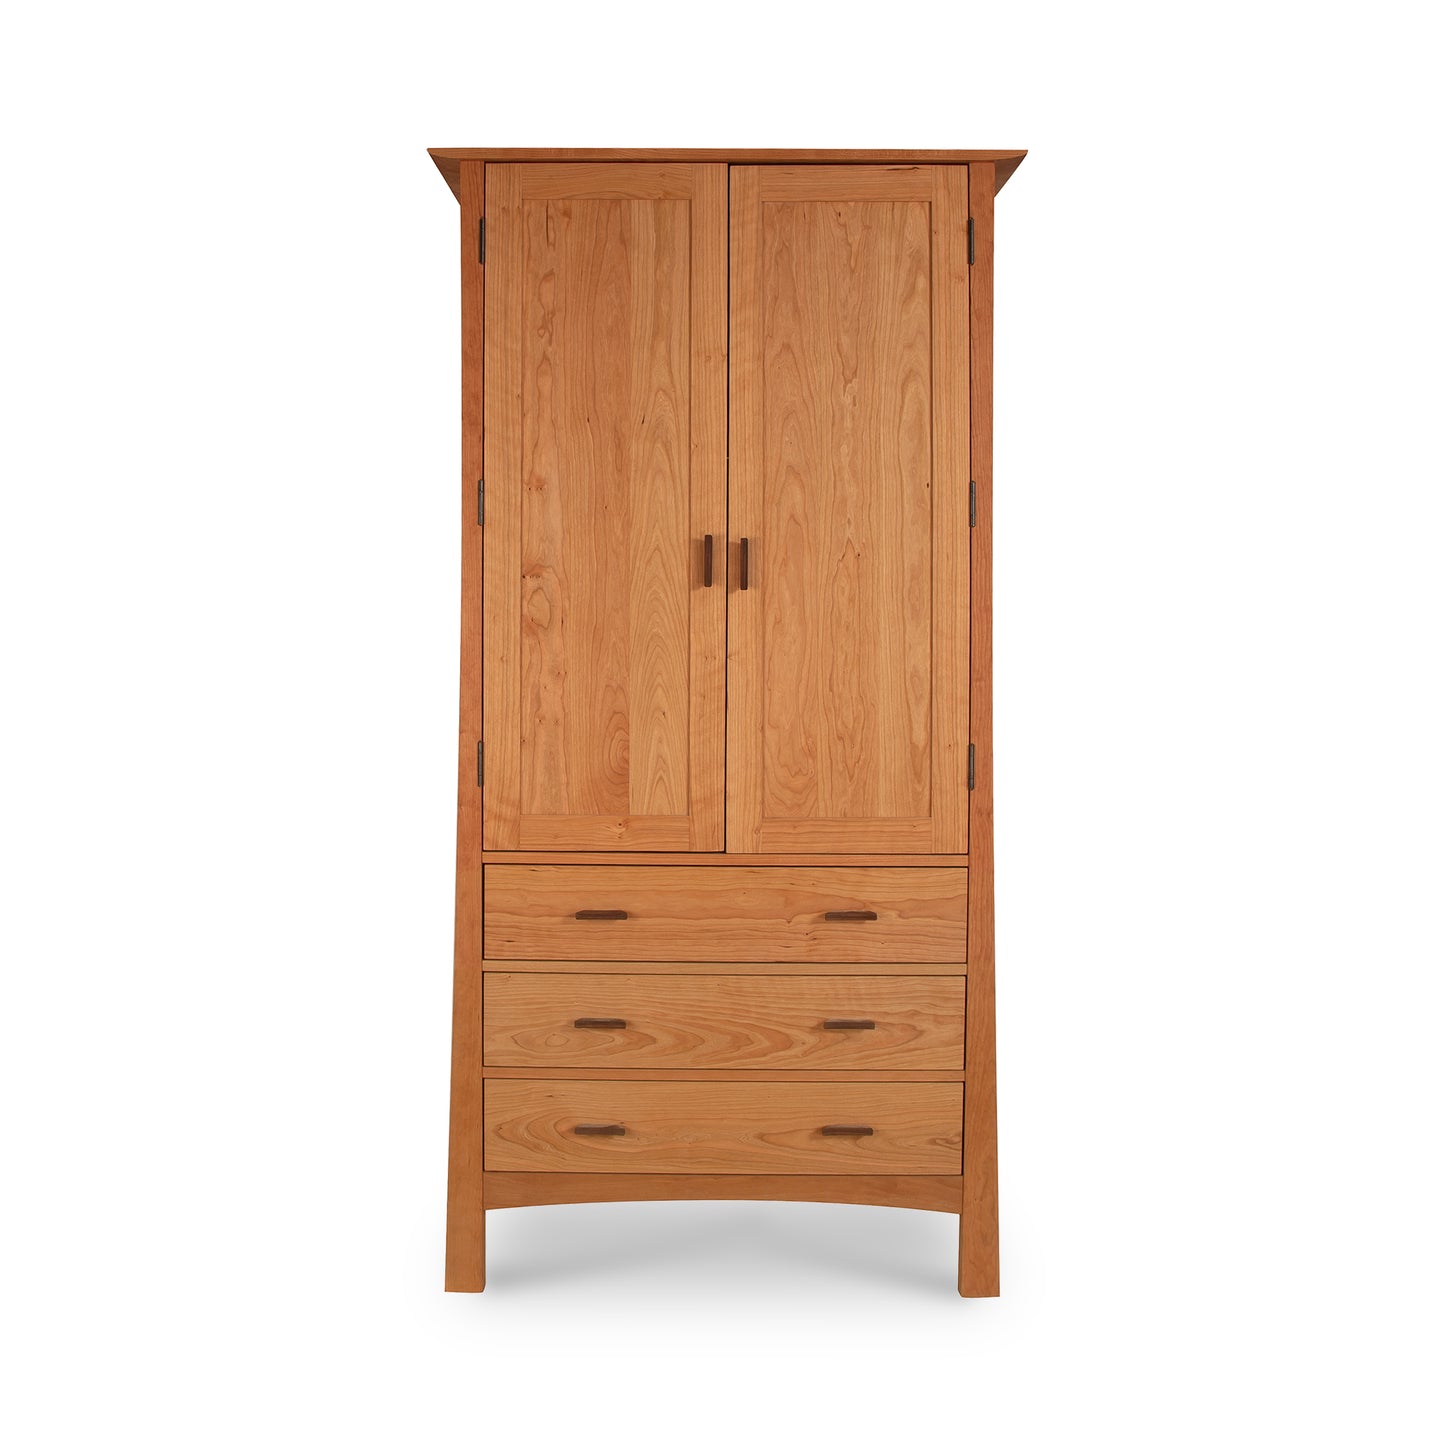 Sentence with product replaced: A Vermont Furniture Designs Contemporary Craftsman Tall Armoire with two doors above and three drawers below, against a white background.